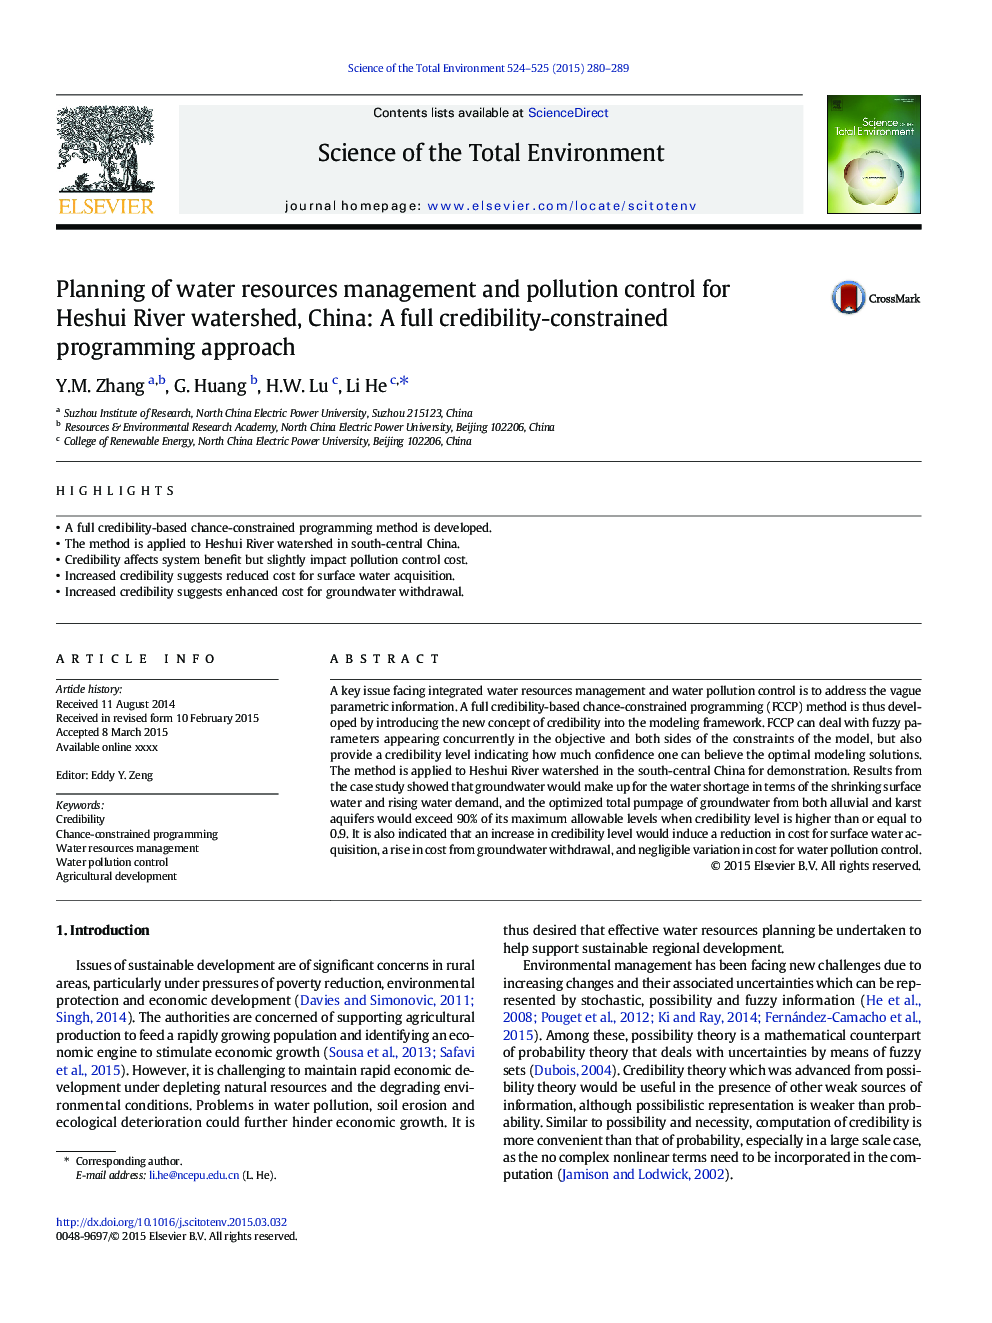 Planning of water resources management and pollution control for Heshui River watershed, China: A full credibility-constrained programming approach